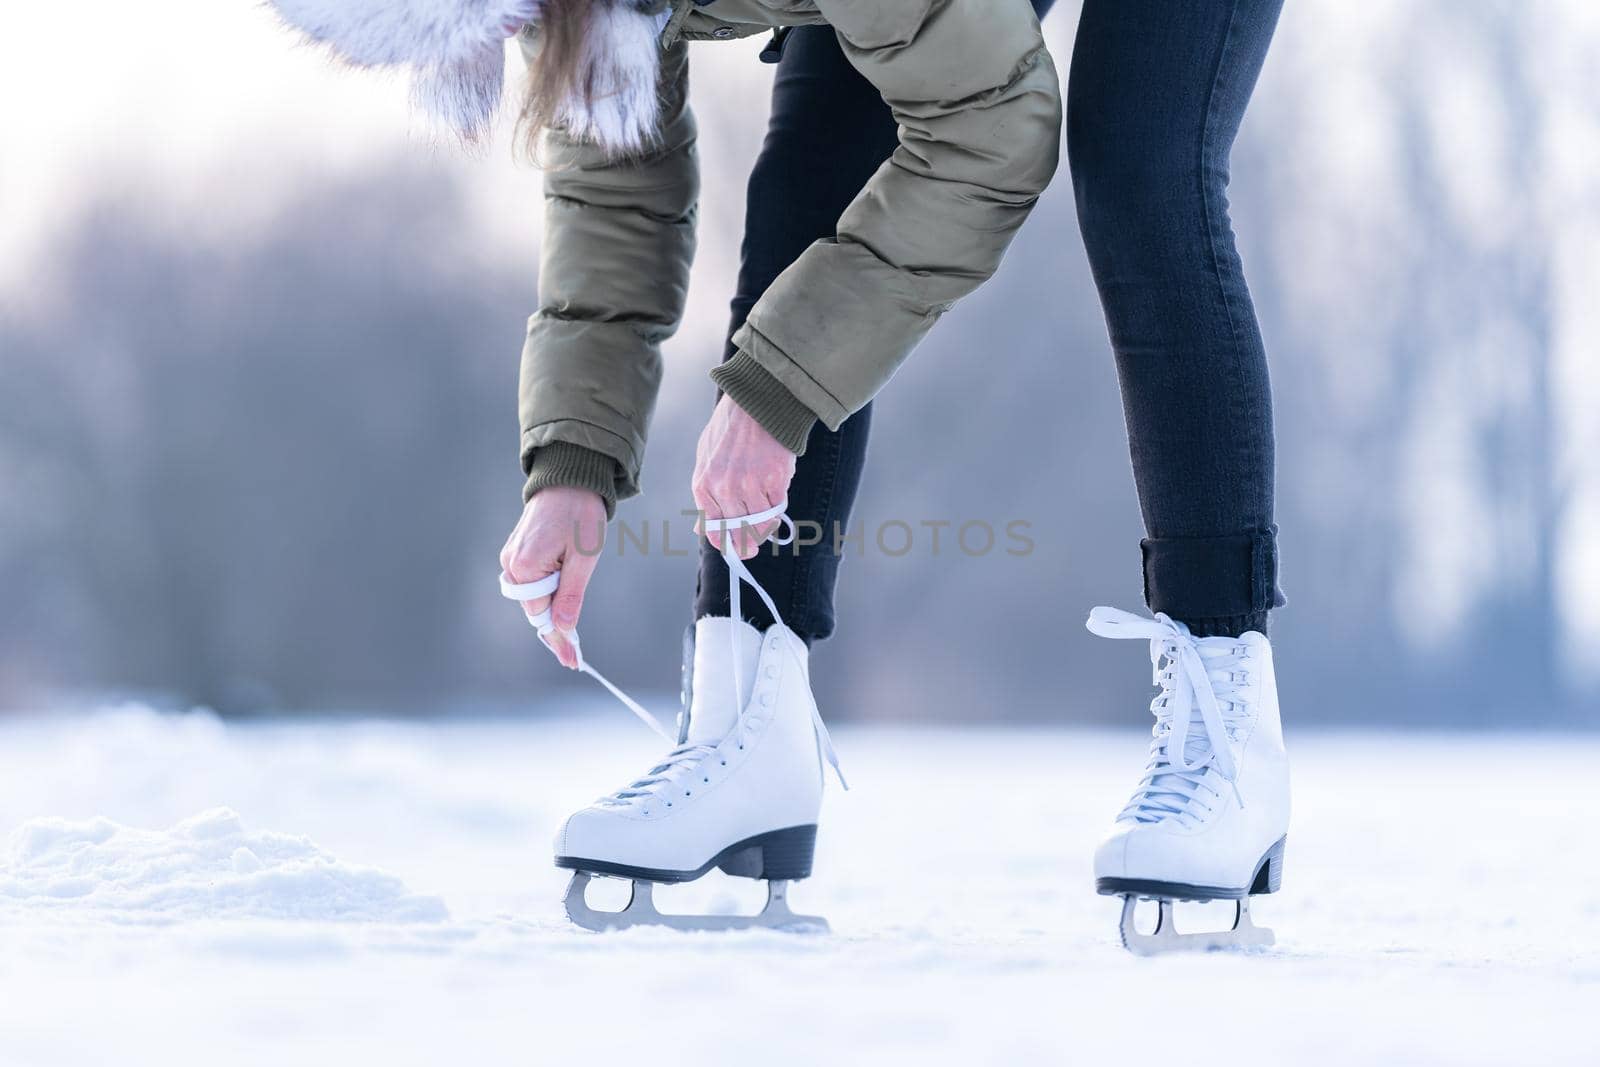 tying the laces of winter skates on a frozen lake